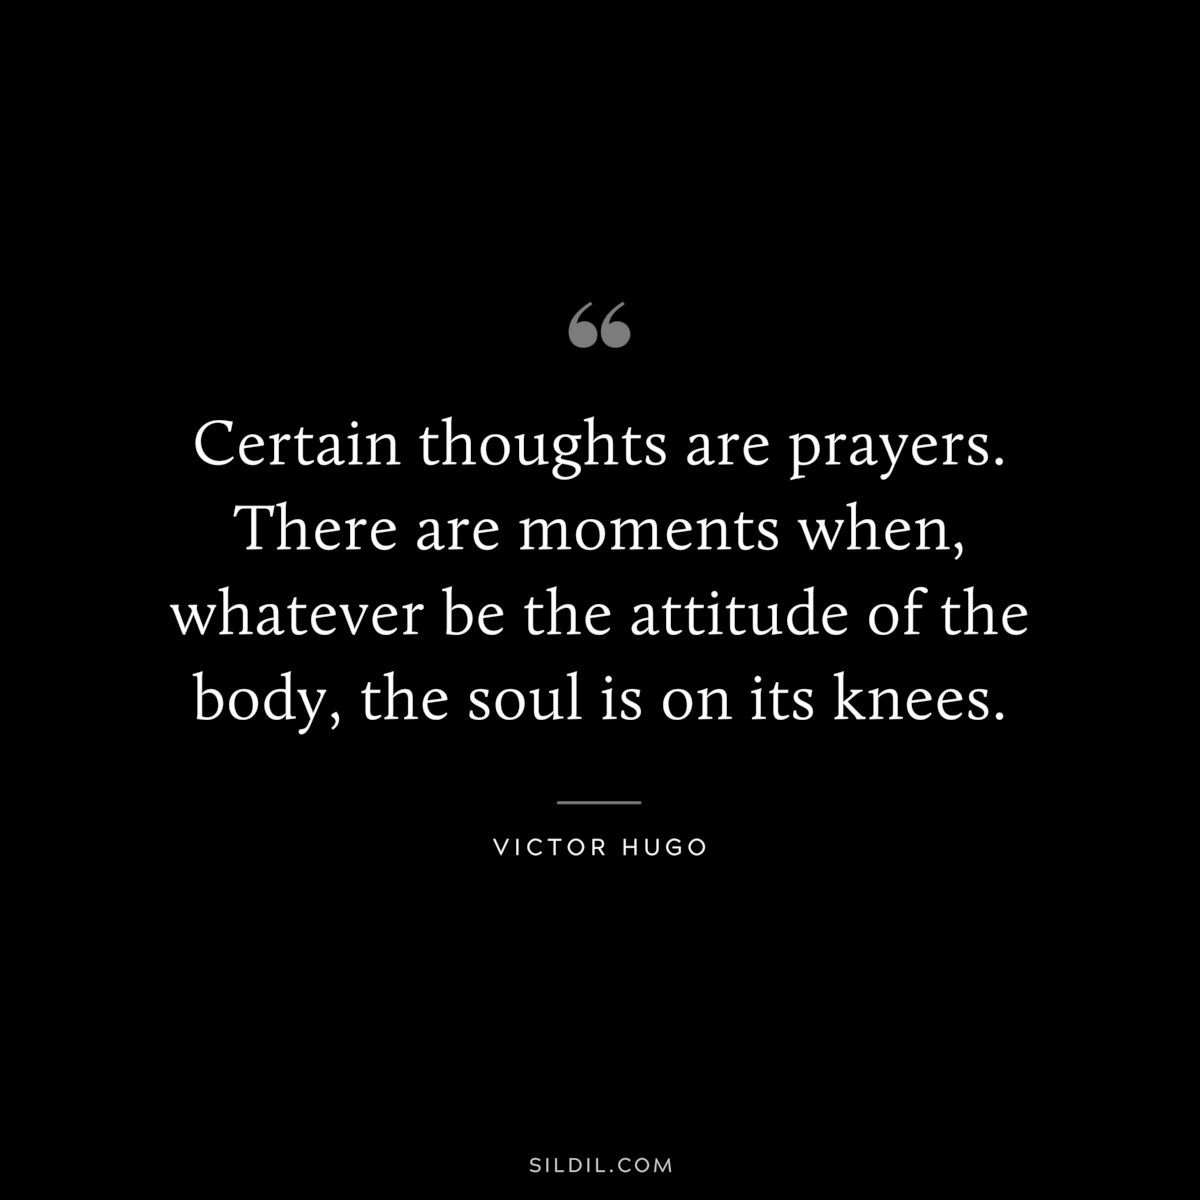 Certain thoughts are prayers. There are moments when, whatever be the attitude of the body, the soul is on its knees.― Victor Hugo